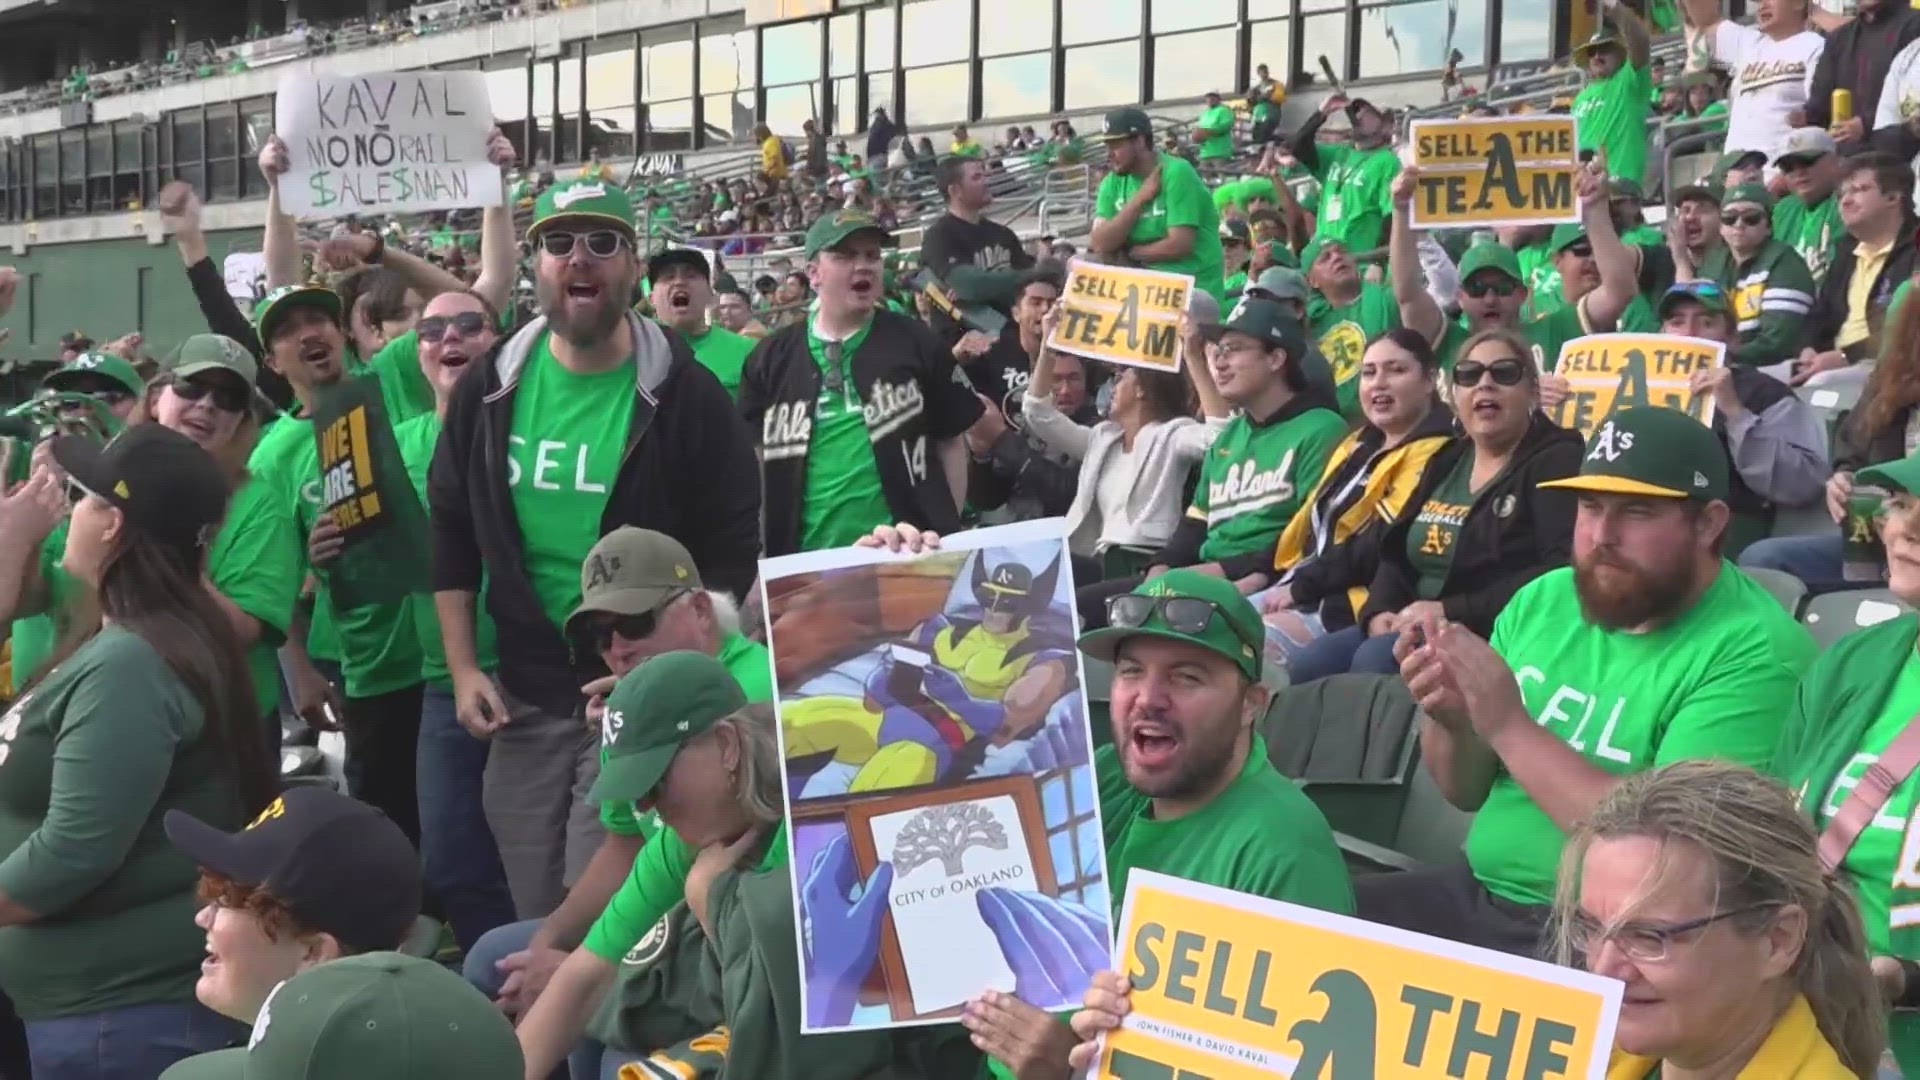 Oakland Athletics fans came en masse with a single message to owner John Fisher: “SELL.”